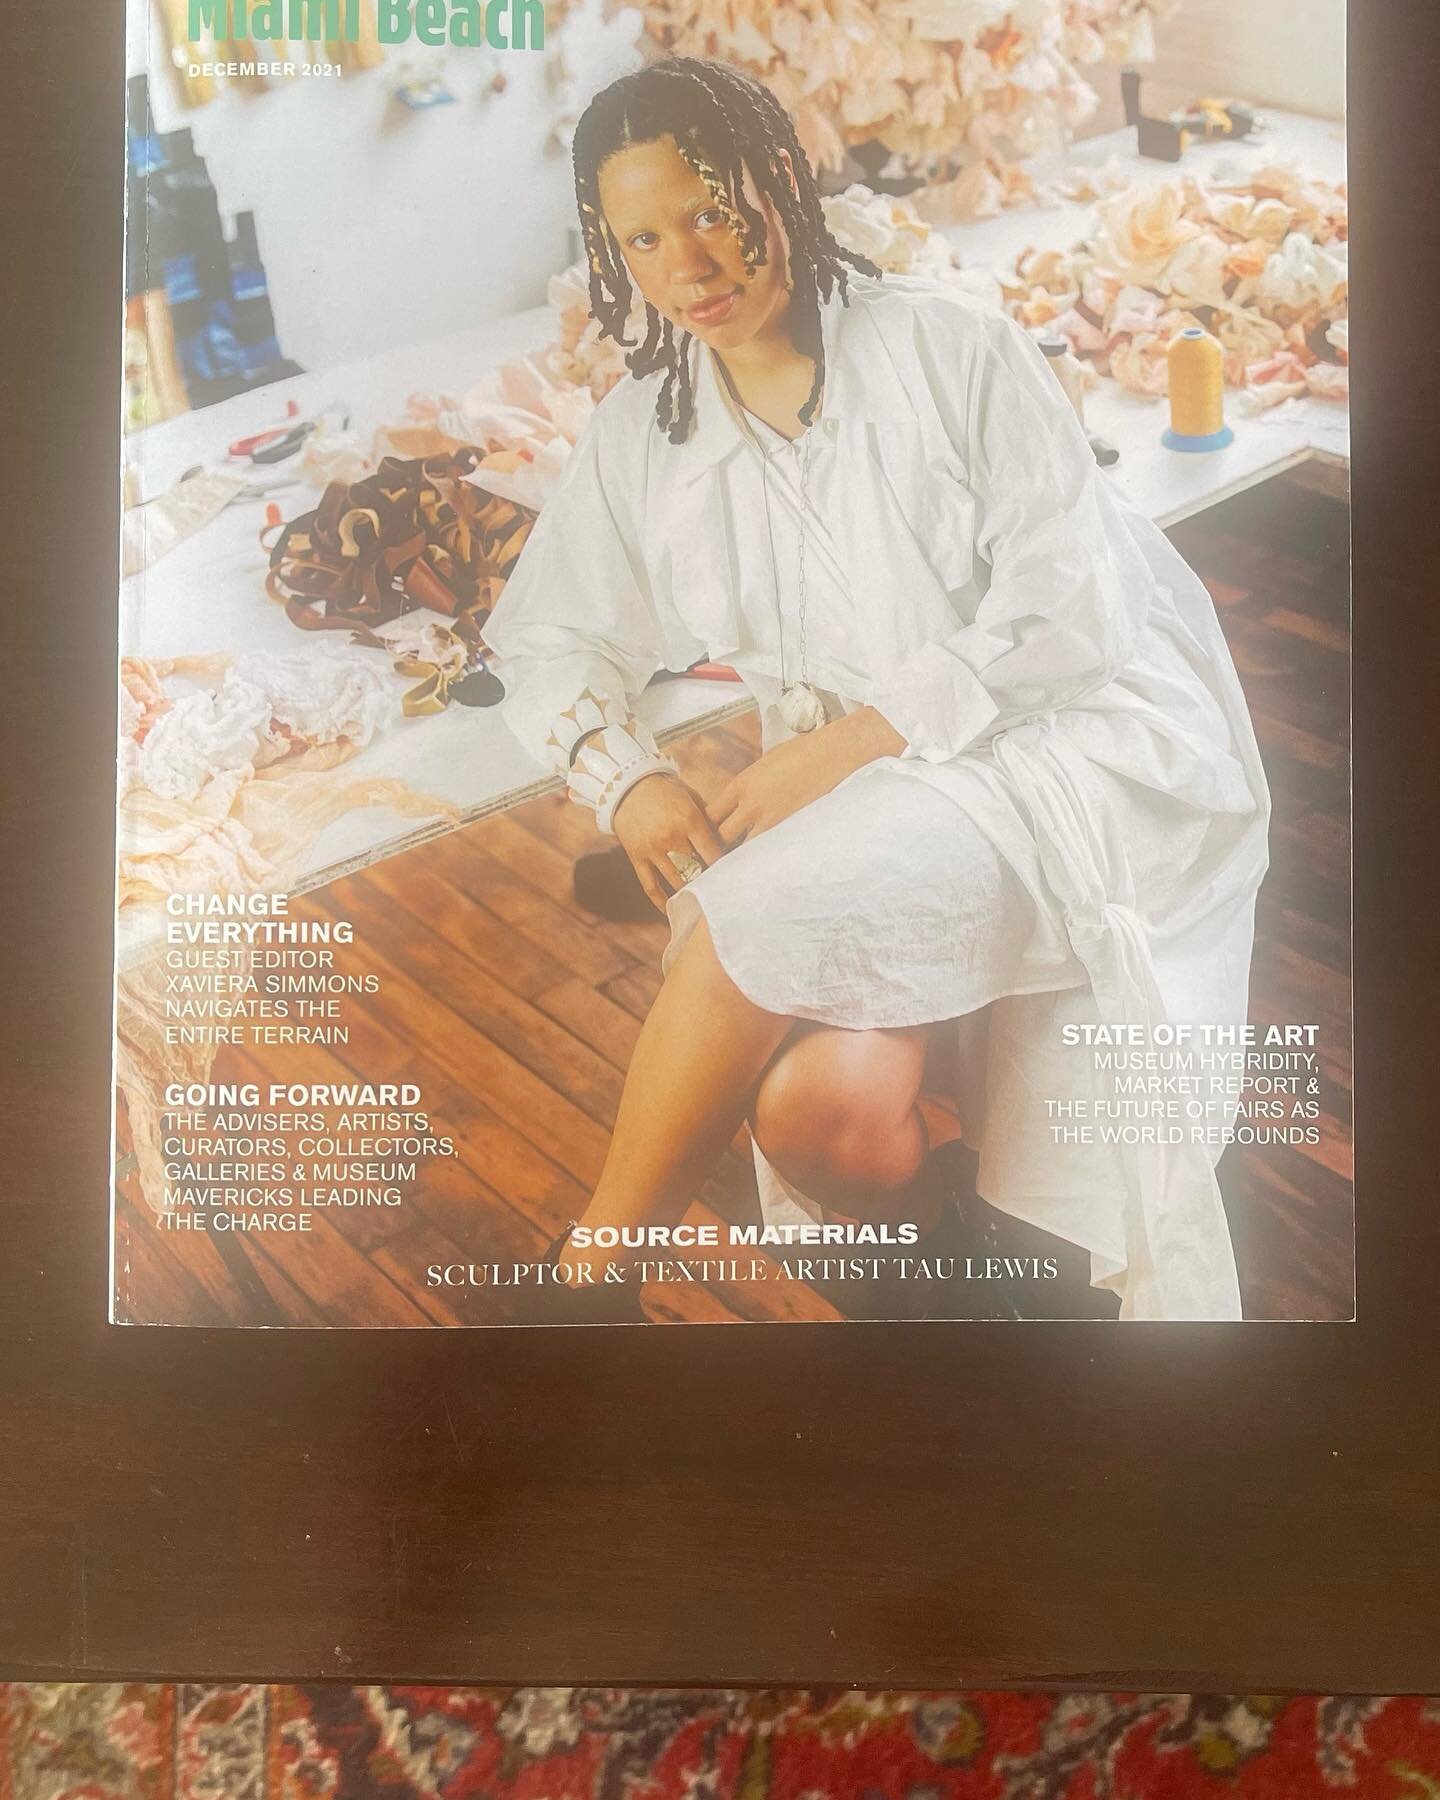 Stumbling across this printed publication for @baselmiami with guest editor @xavierasimmons with @davidcastillogallery. This is why investing in great documentation for your art is so important for the present and future use of the work. Thank you #d